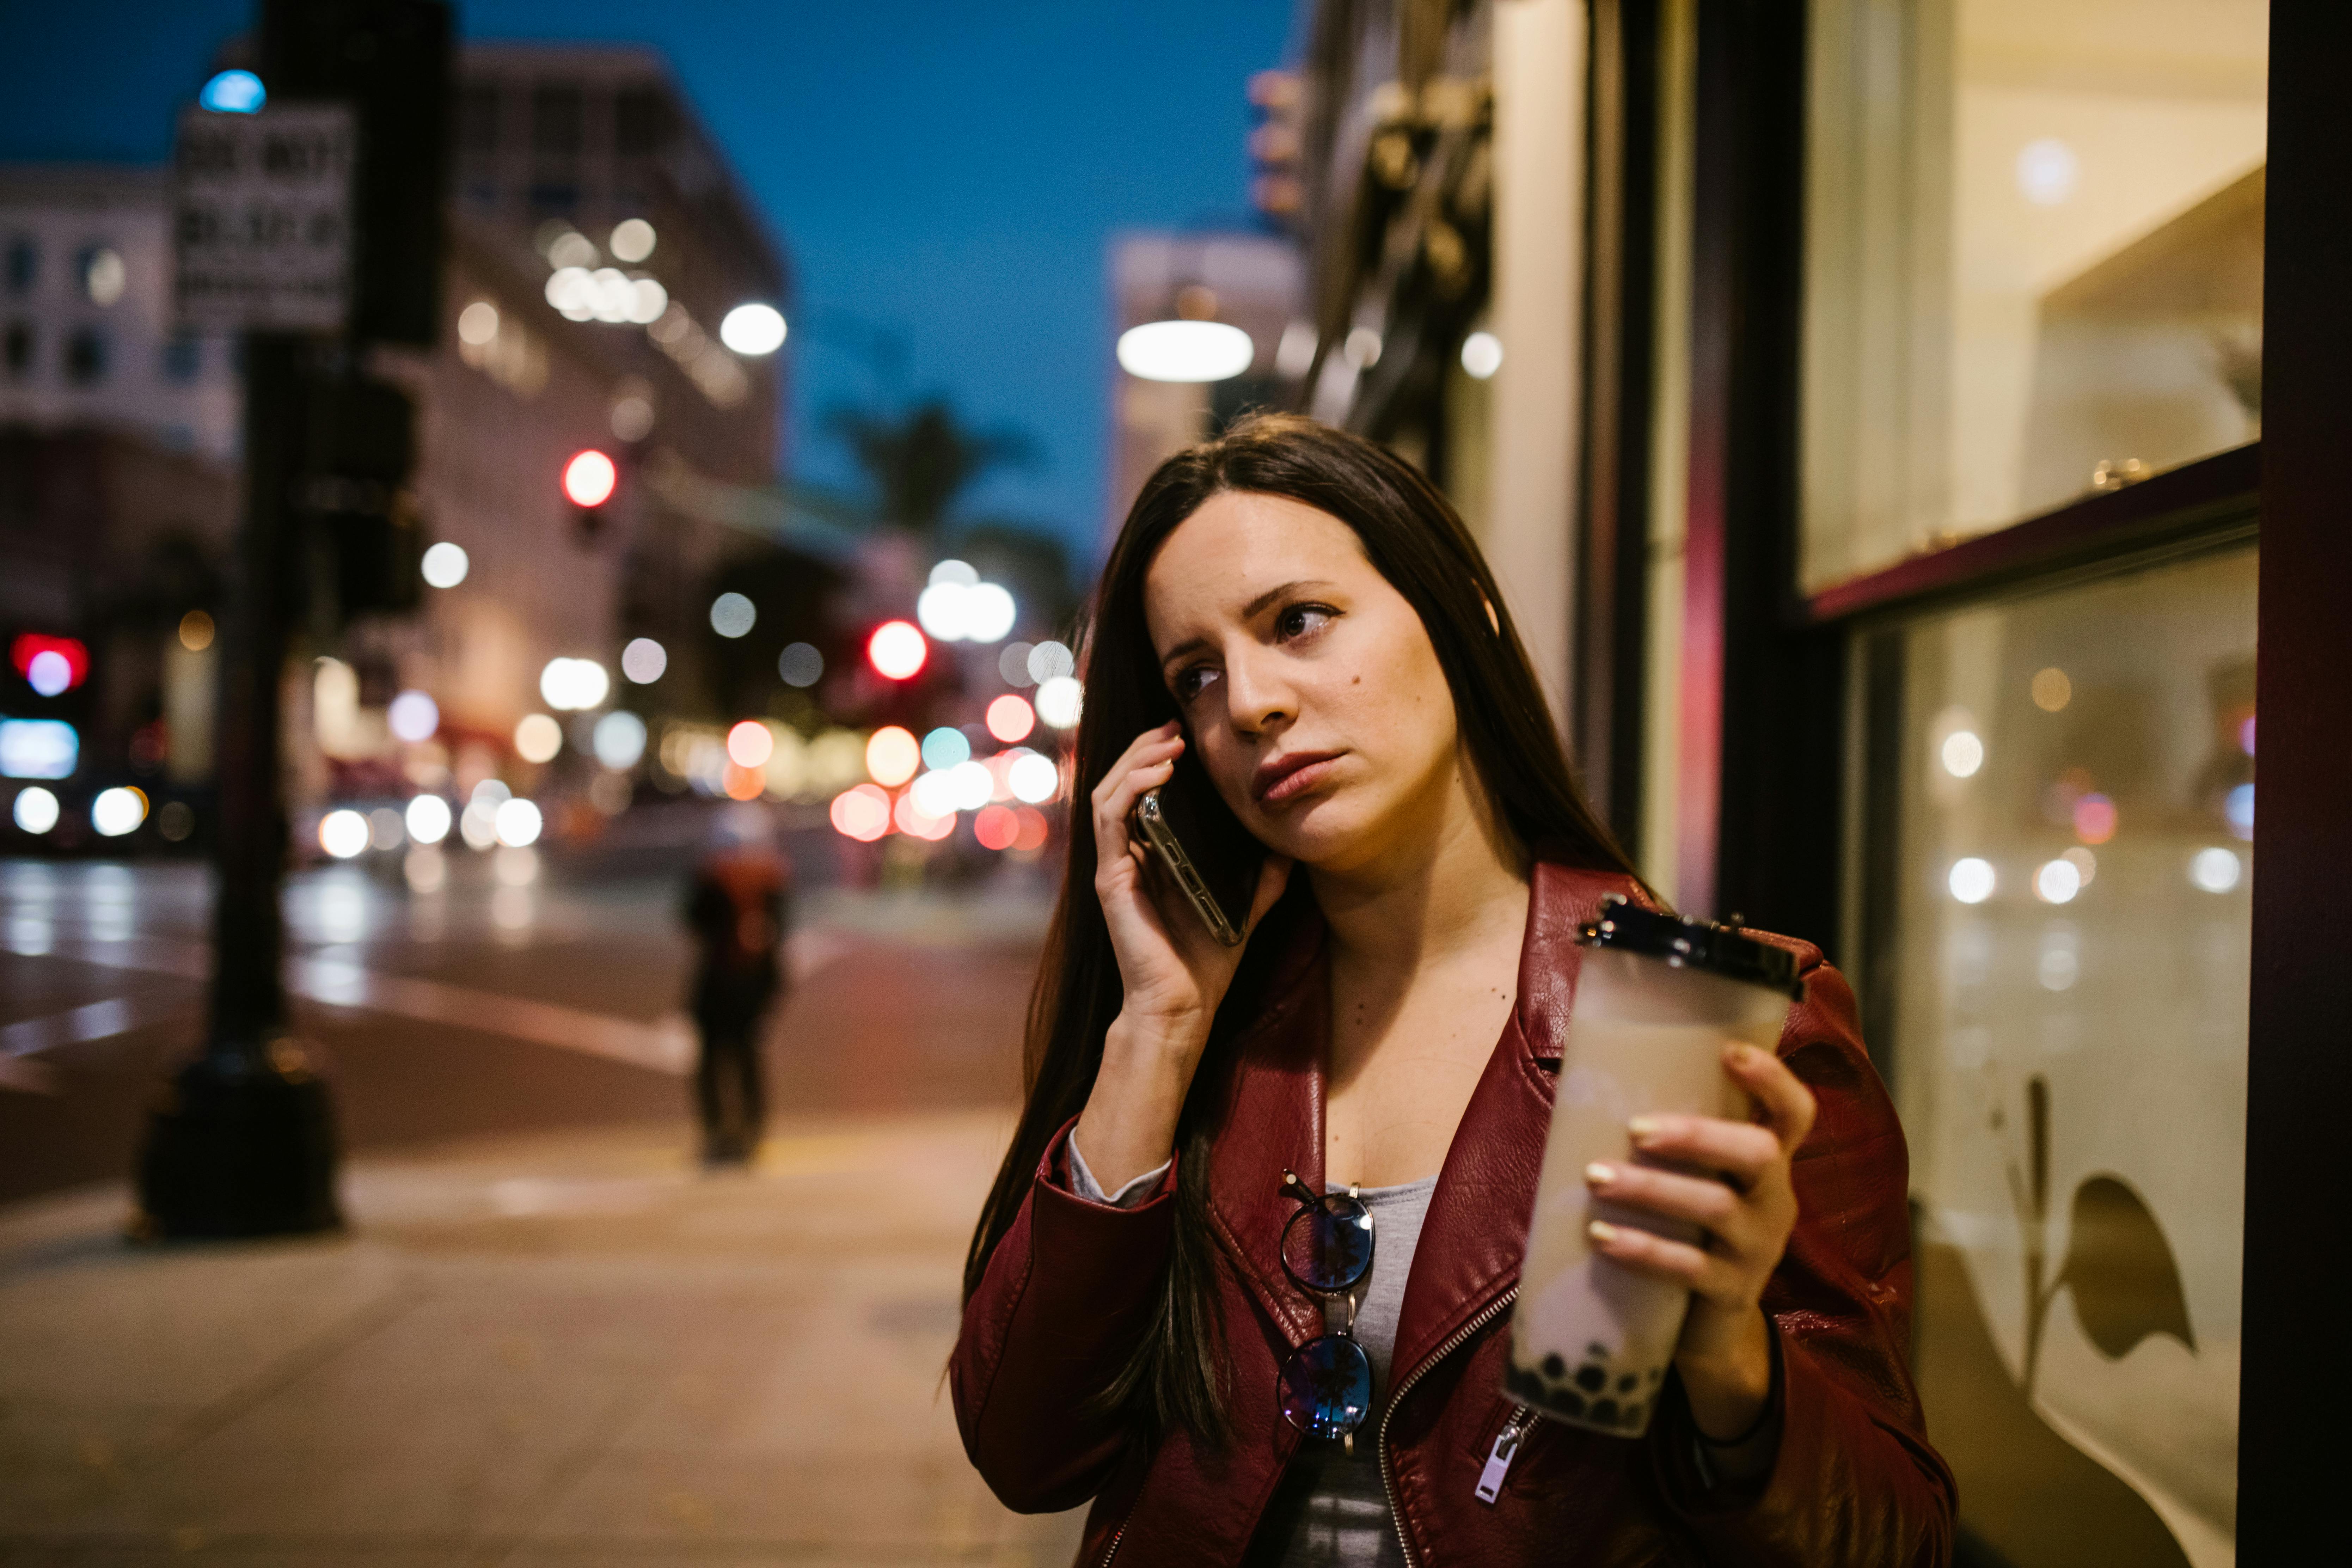 A woman on the phone in on a sidewalk | Source: Pexels